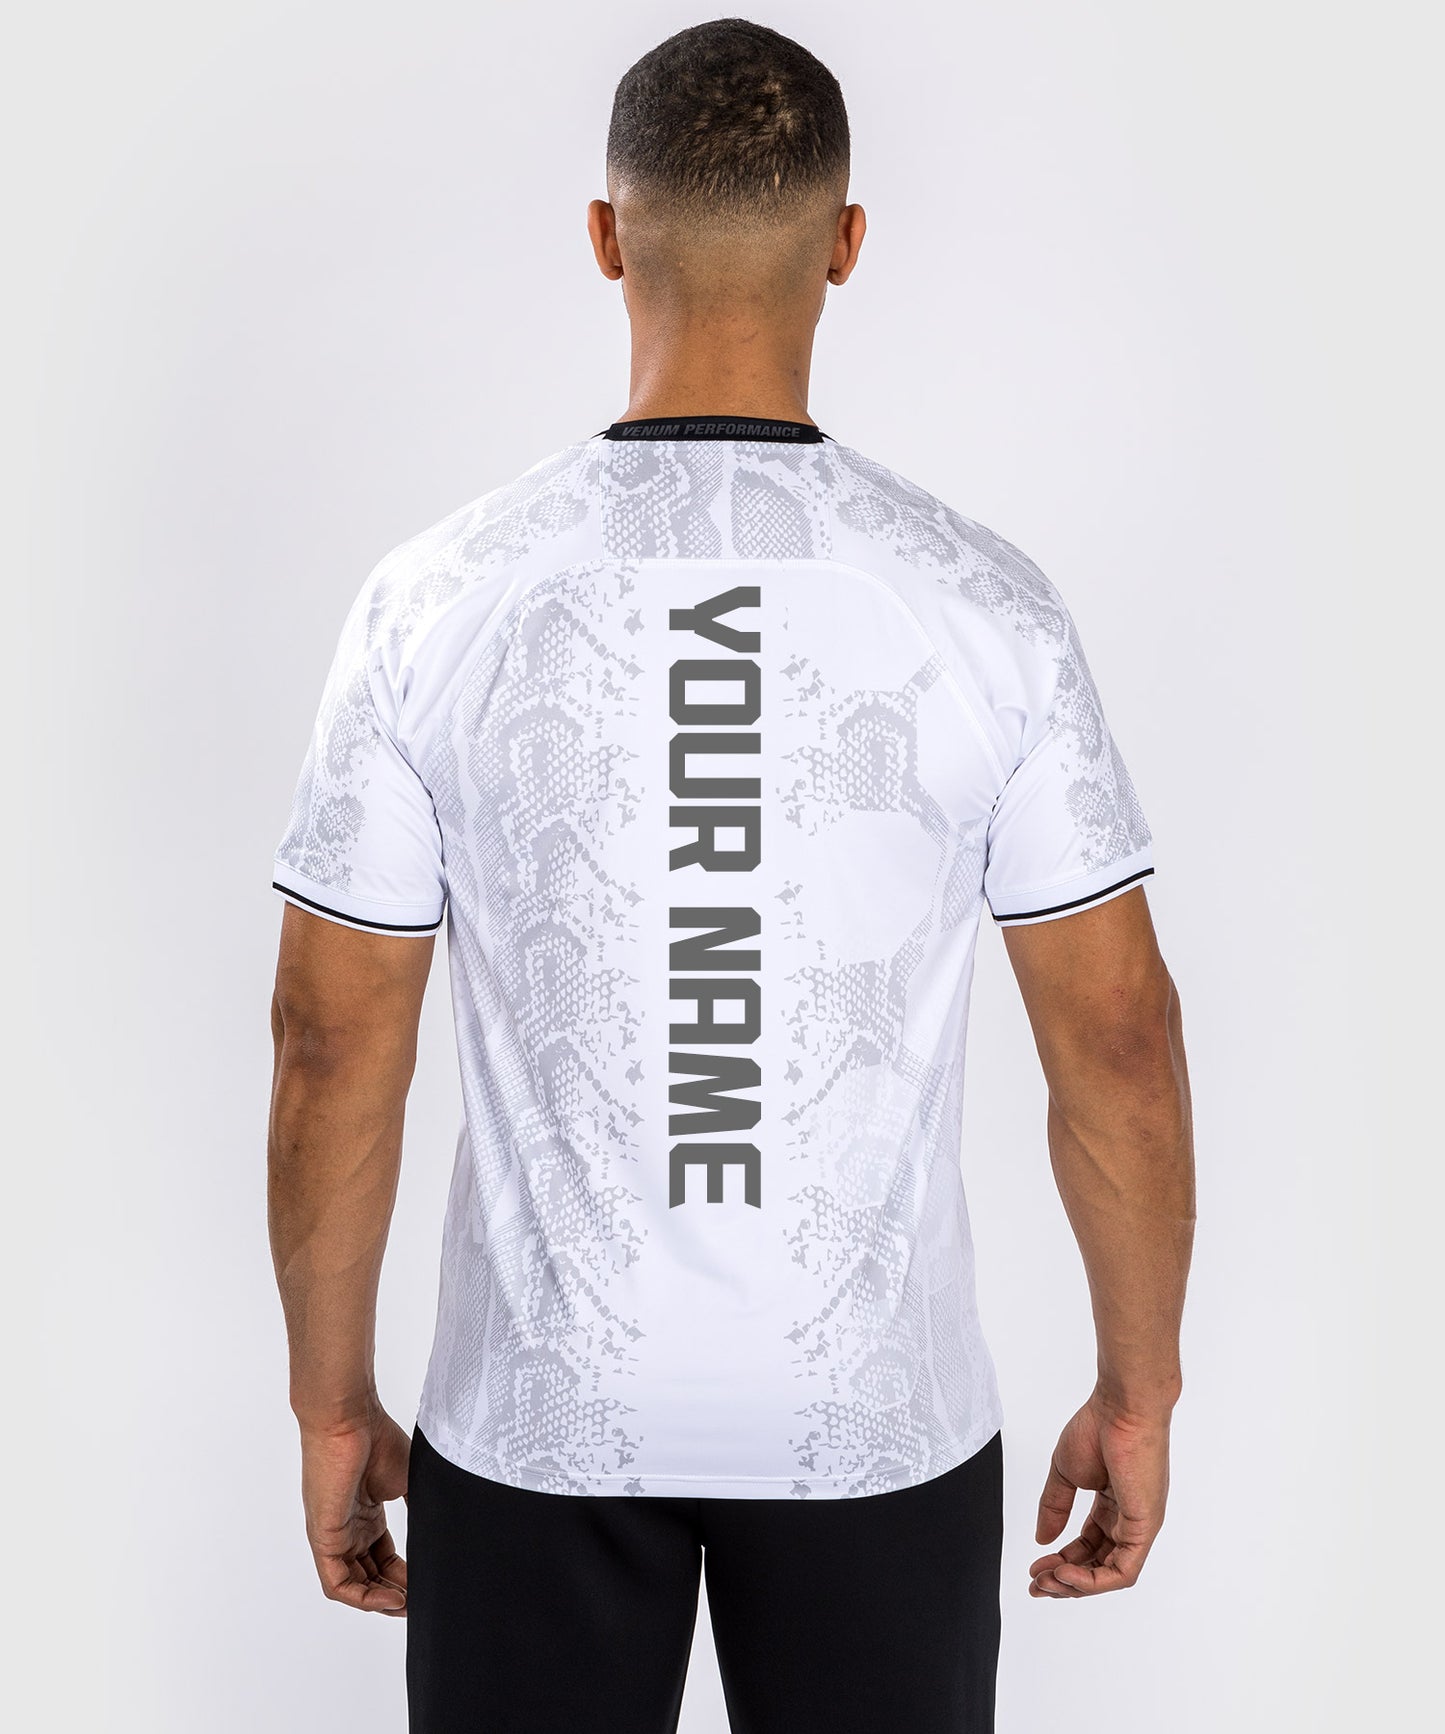 UFC Adrenaline by Venum Personalized Authentic Fight Night Men's Walkout Jersey - White